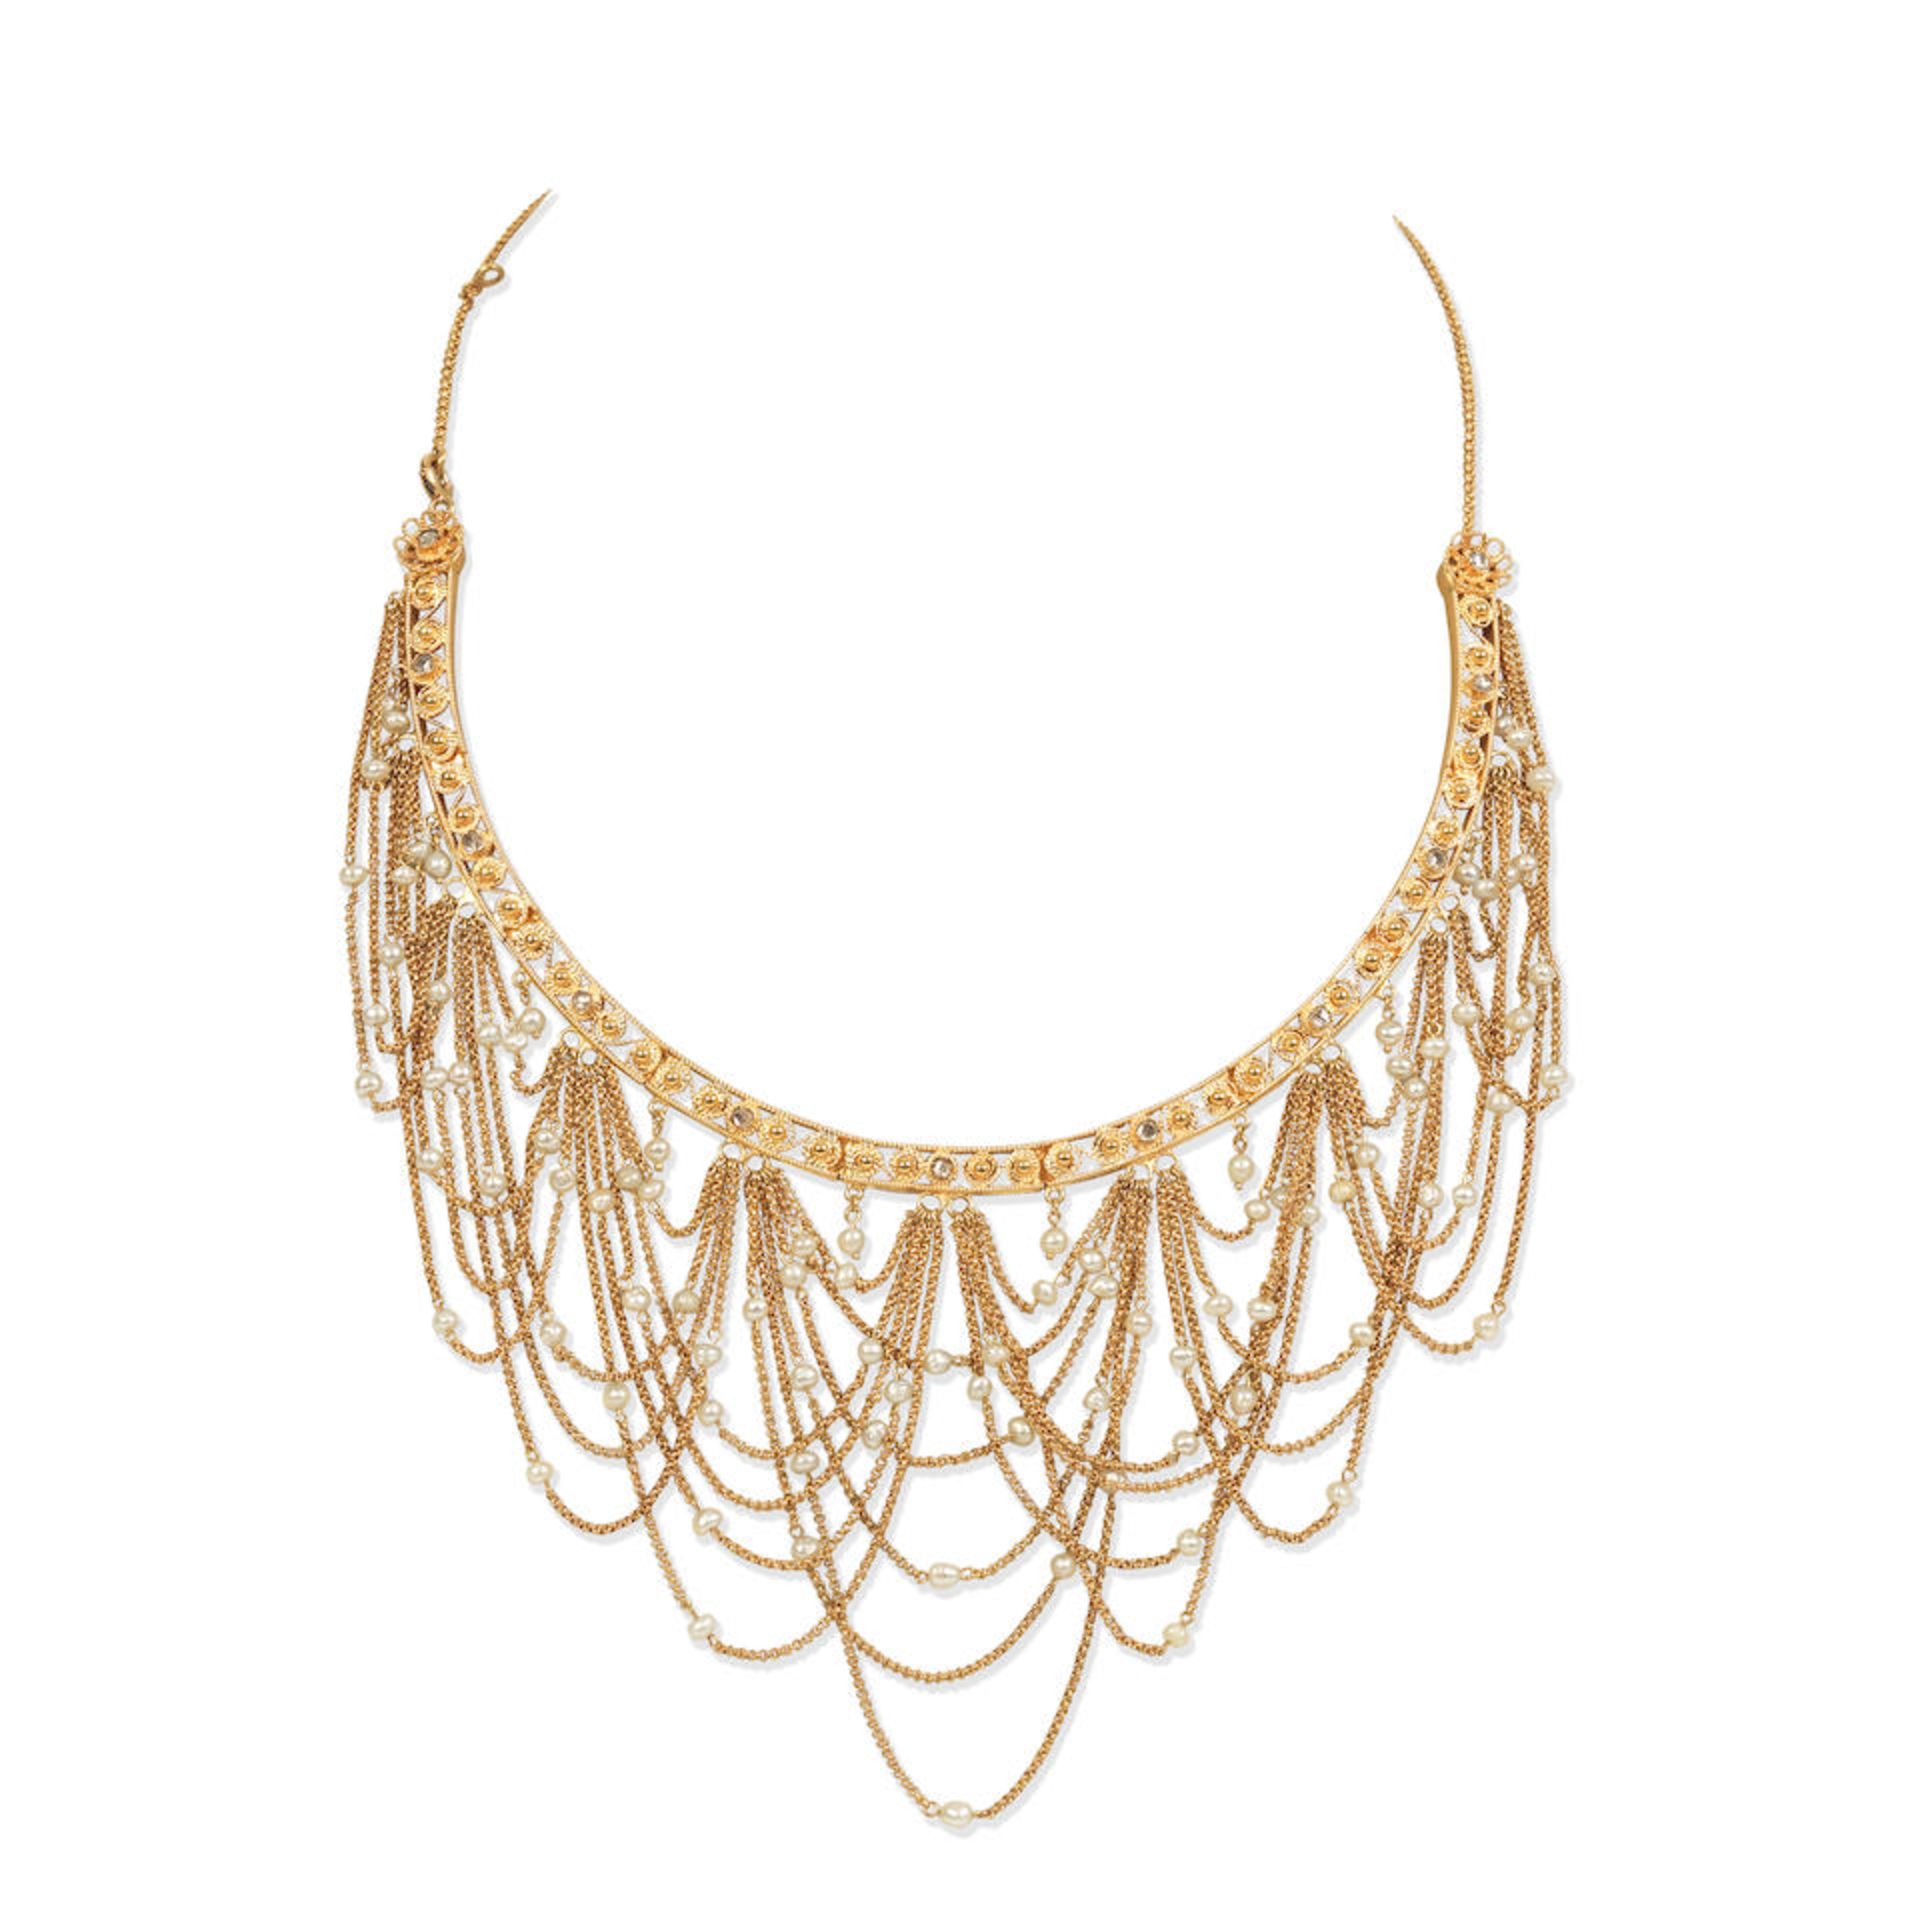 SEED PEARL AND DIAMOND FRINGE NECKLACE